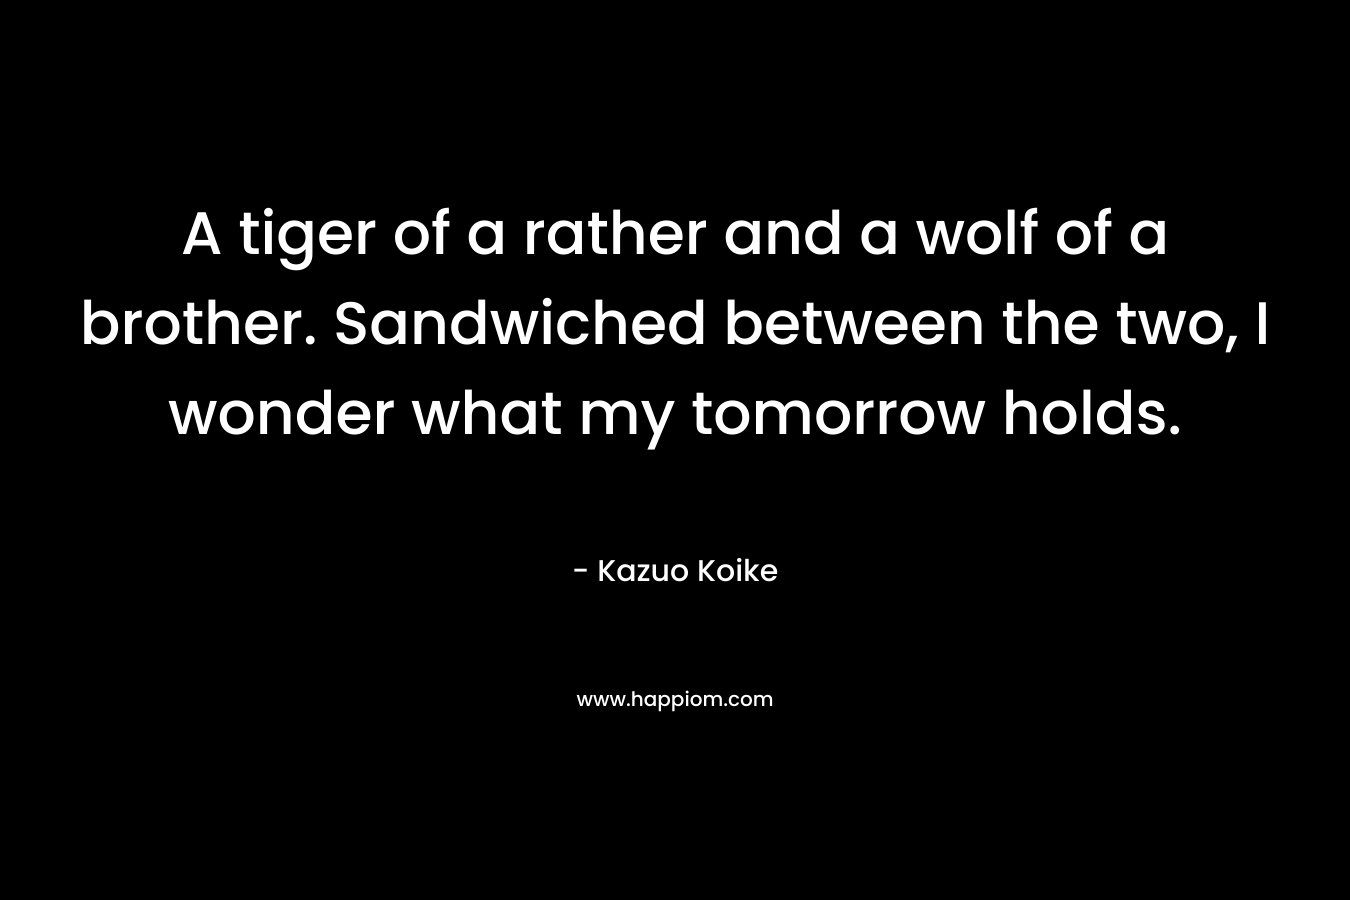 A tiger of a rather and a wolf of a brother. Sandwiched between the two, I wonder what my tomorrow holds. – Kazuo Koike